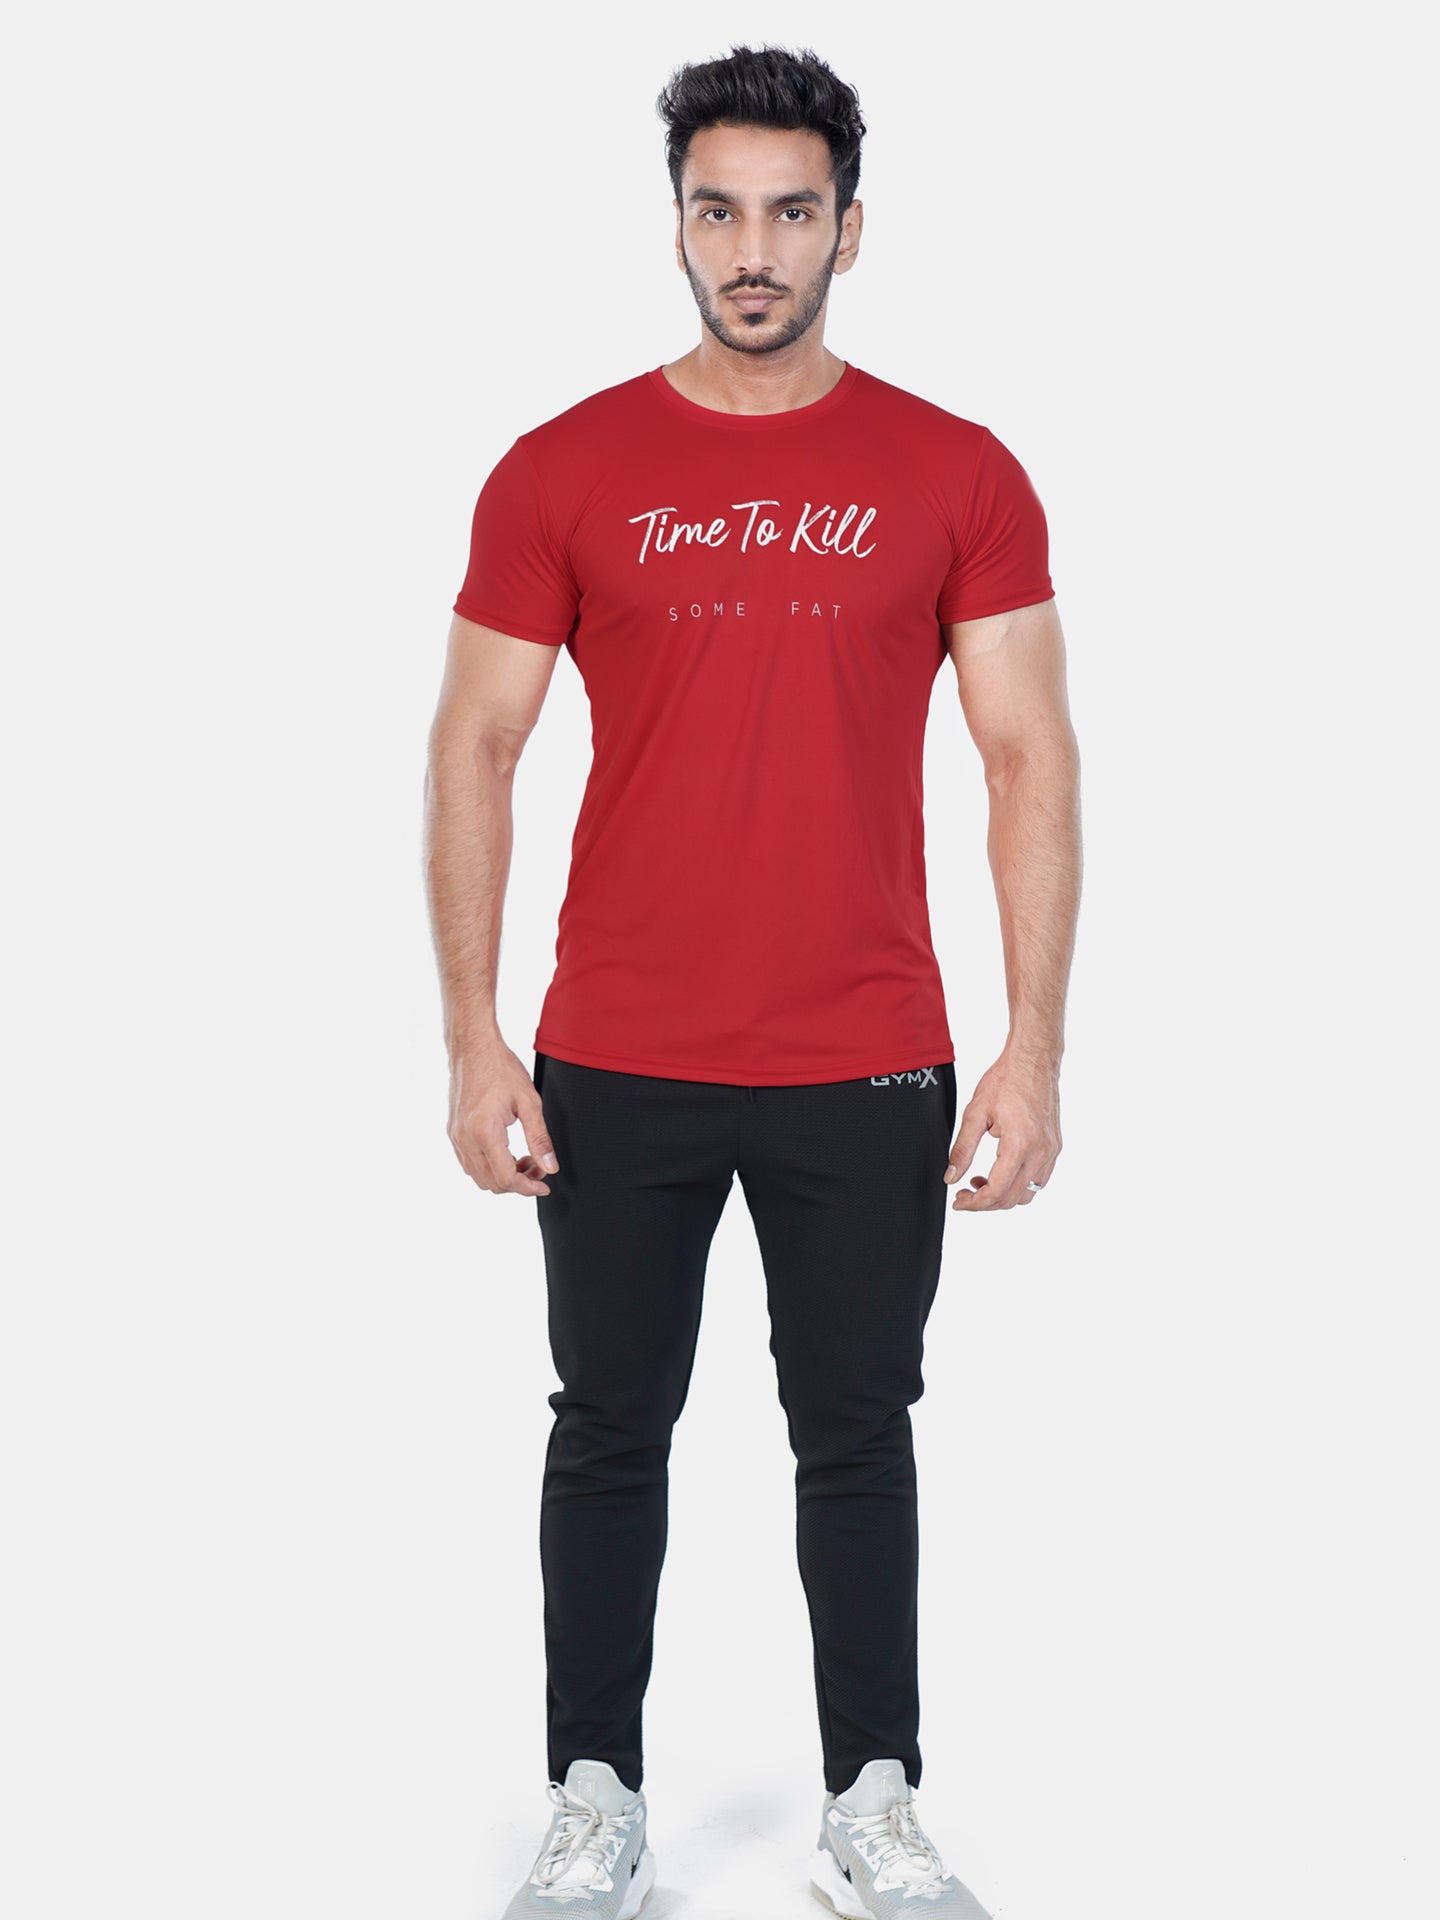 Ultra Lite GymX Red Tee: Time To Kill Some Fat